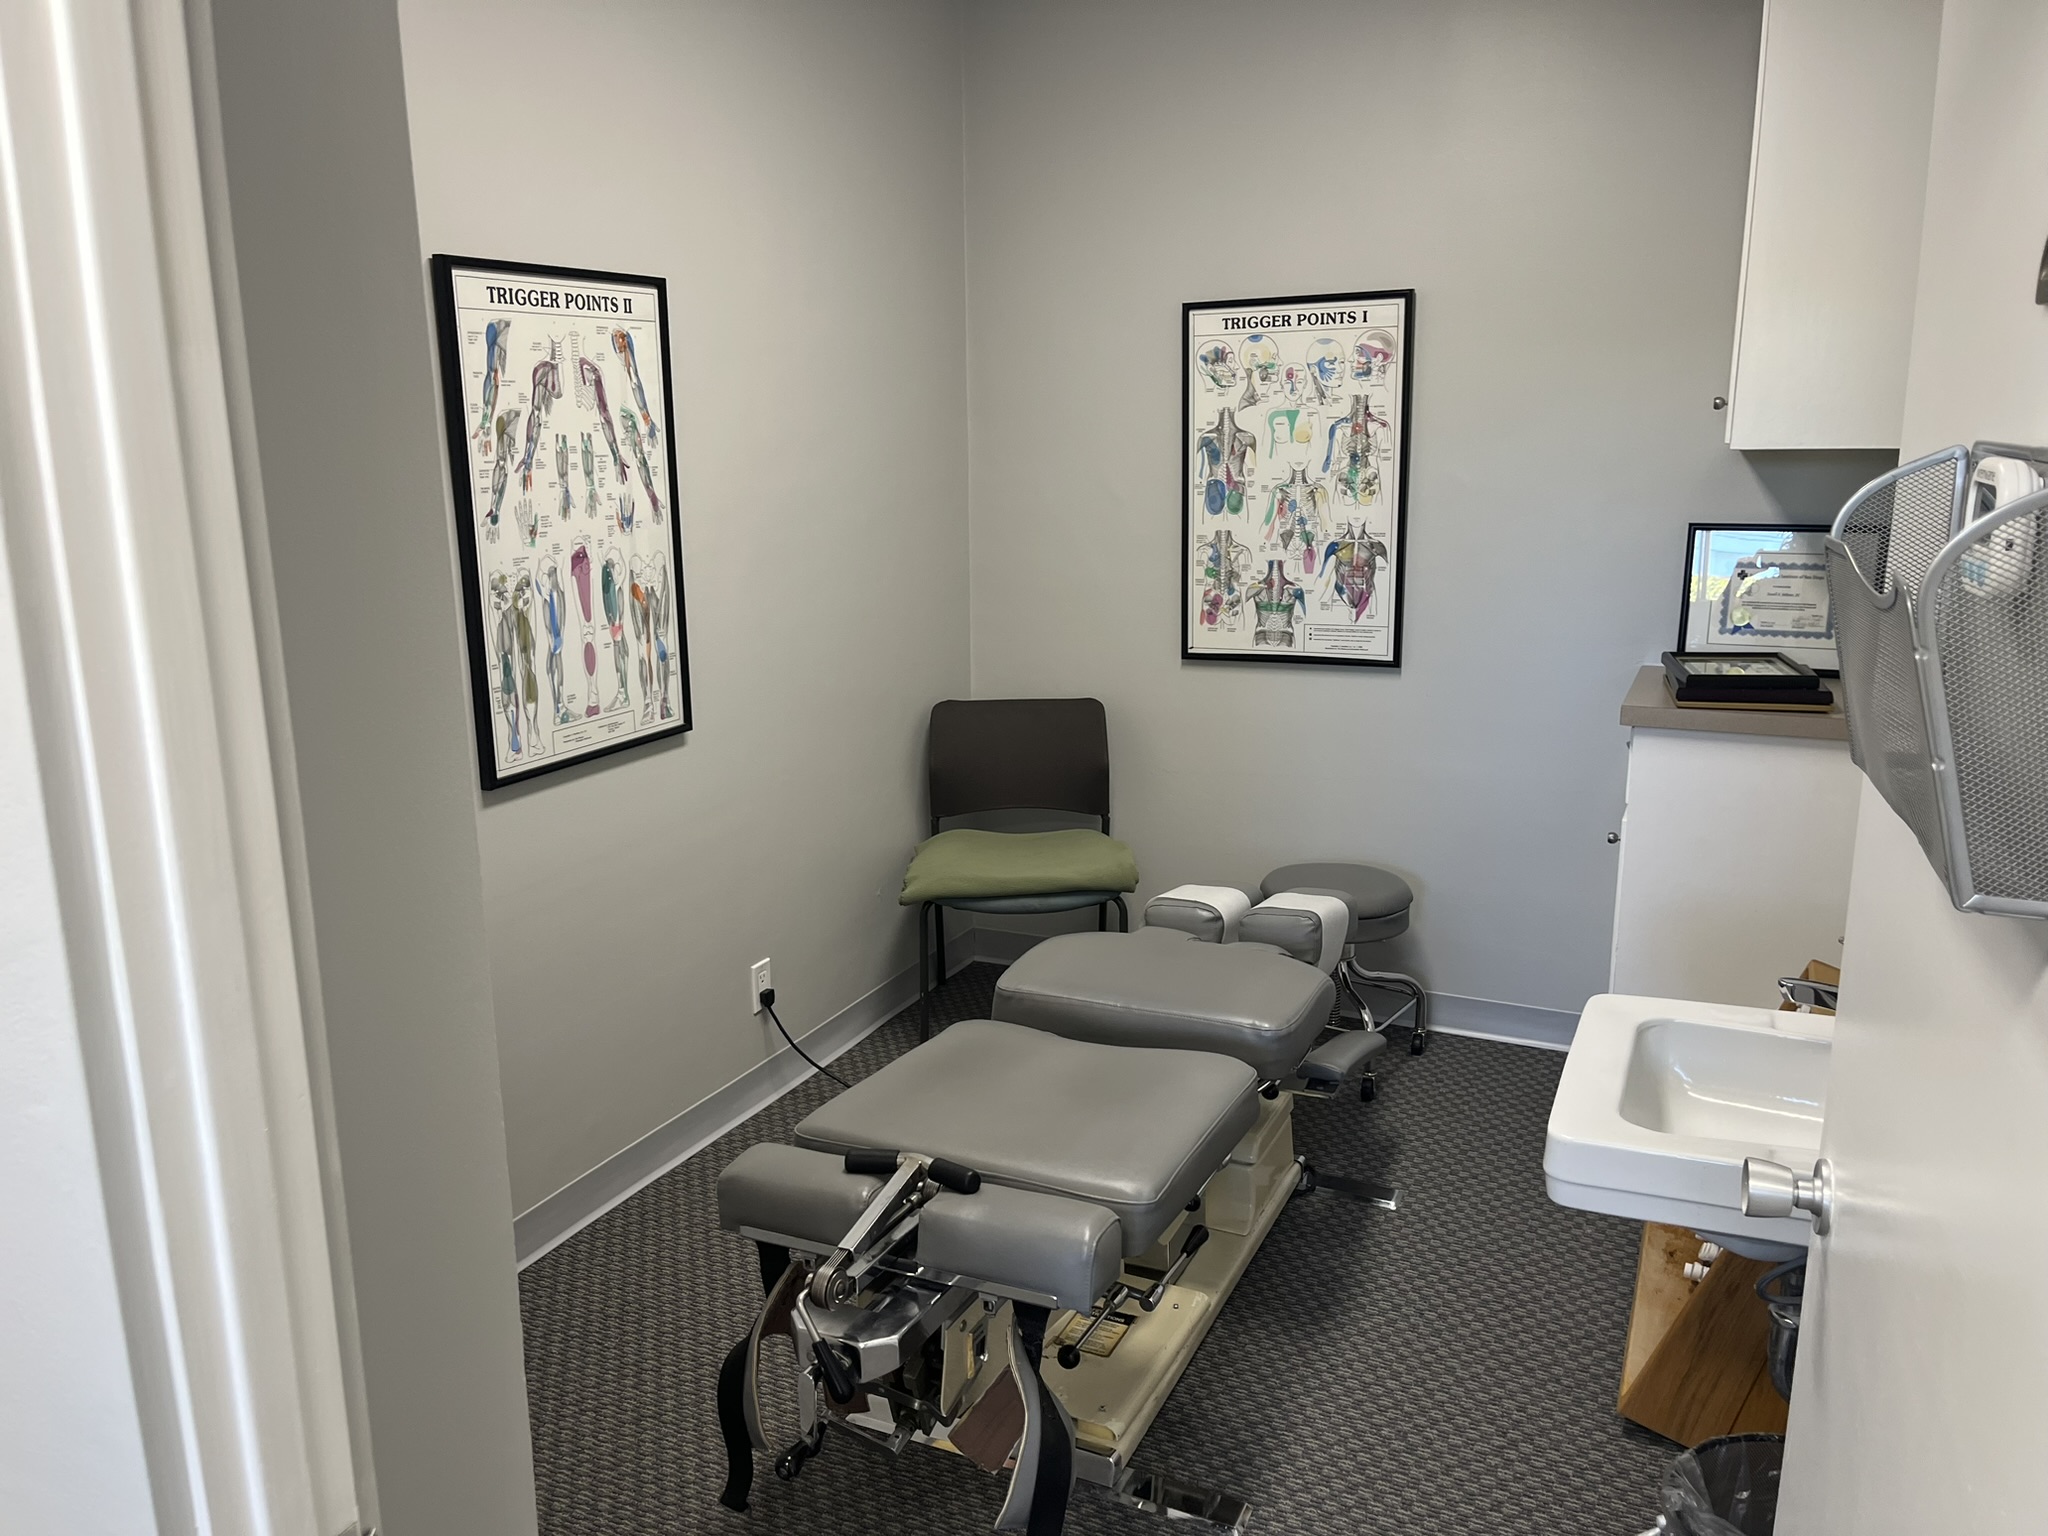 A physical therapy exam and treatment room at the Premier Body Method Sports Medicine and Chiropratic office.